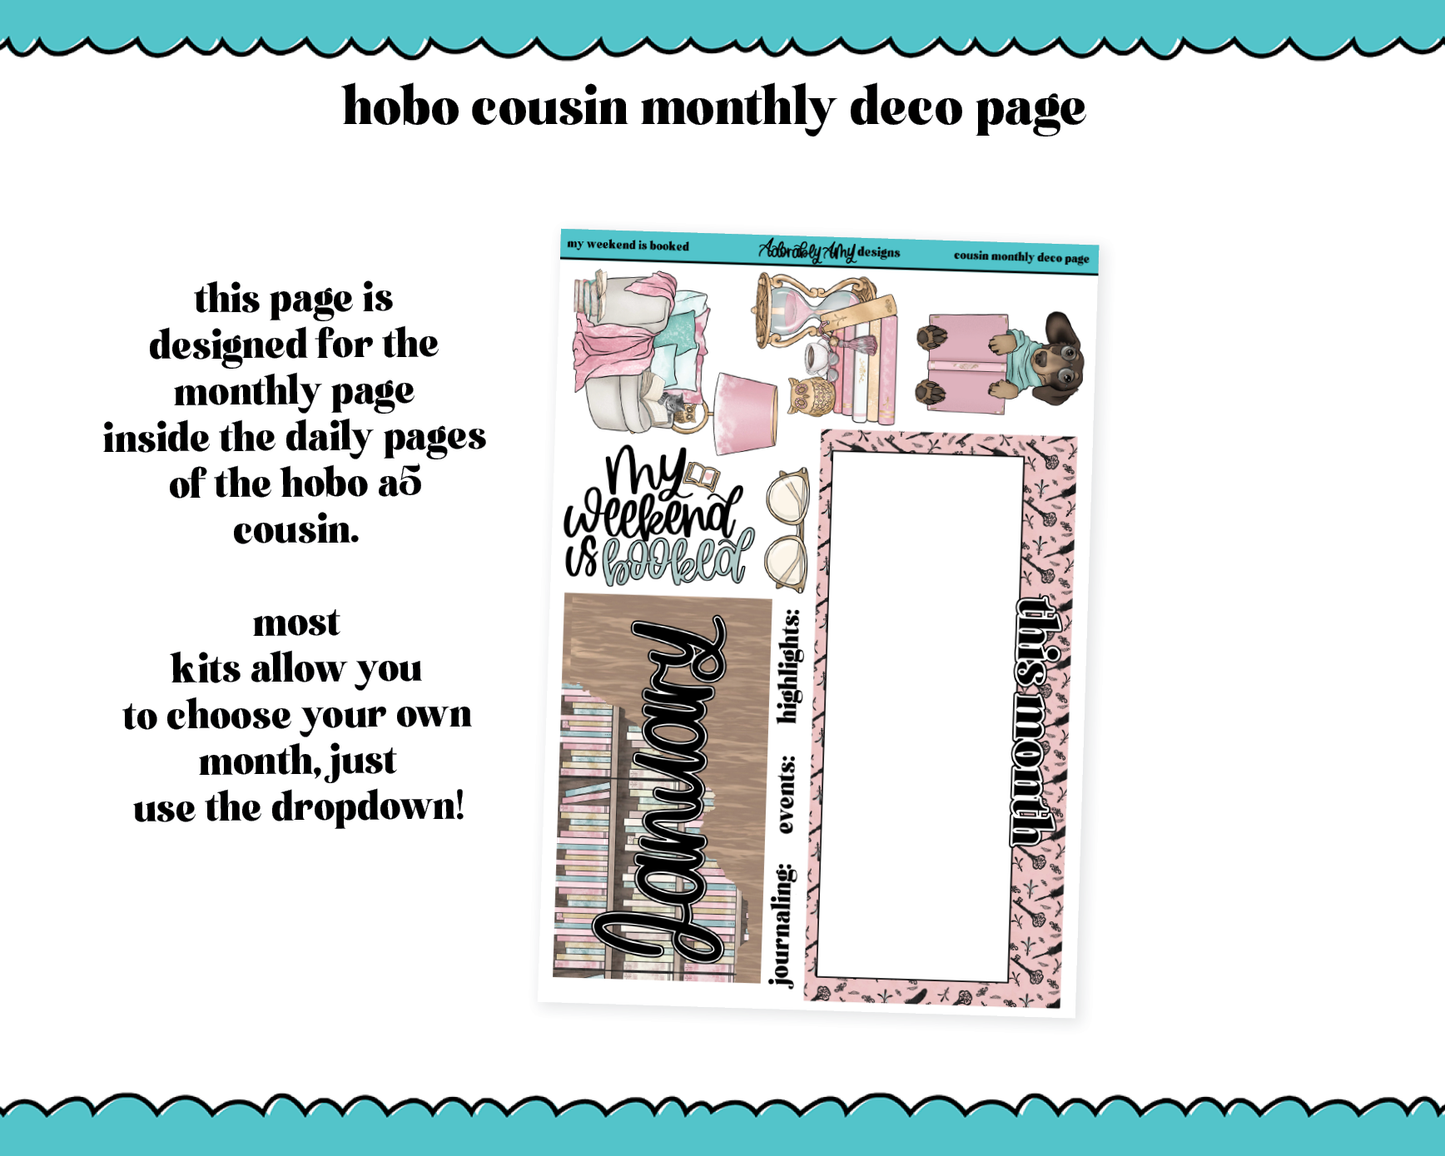 Hobonichi Cousin Monthly Pick Your Month My Weekend is Booked Planner Sticker Kit for Hobo Cousin or Similar Planners